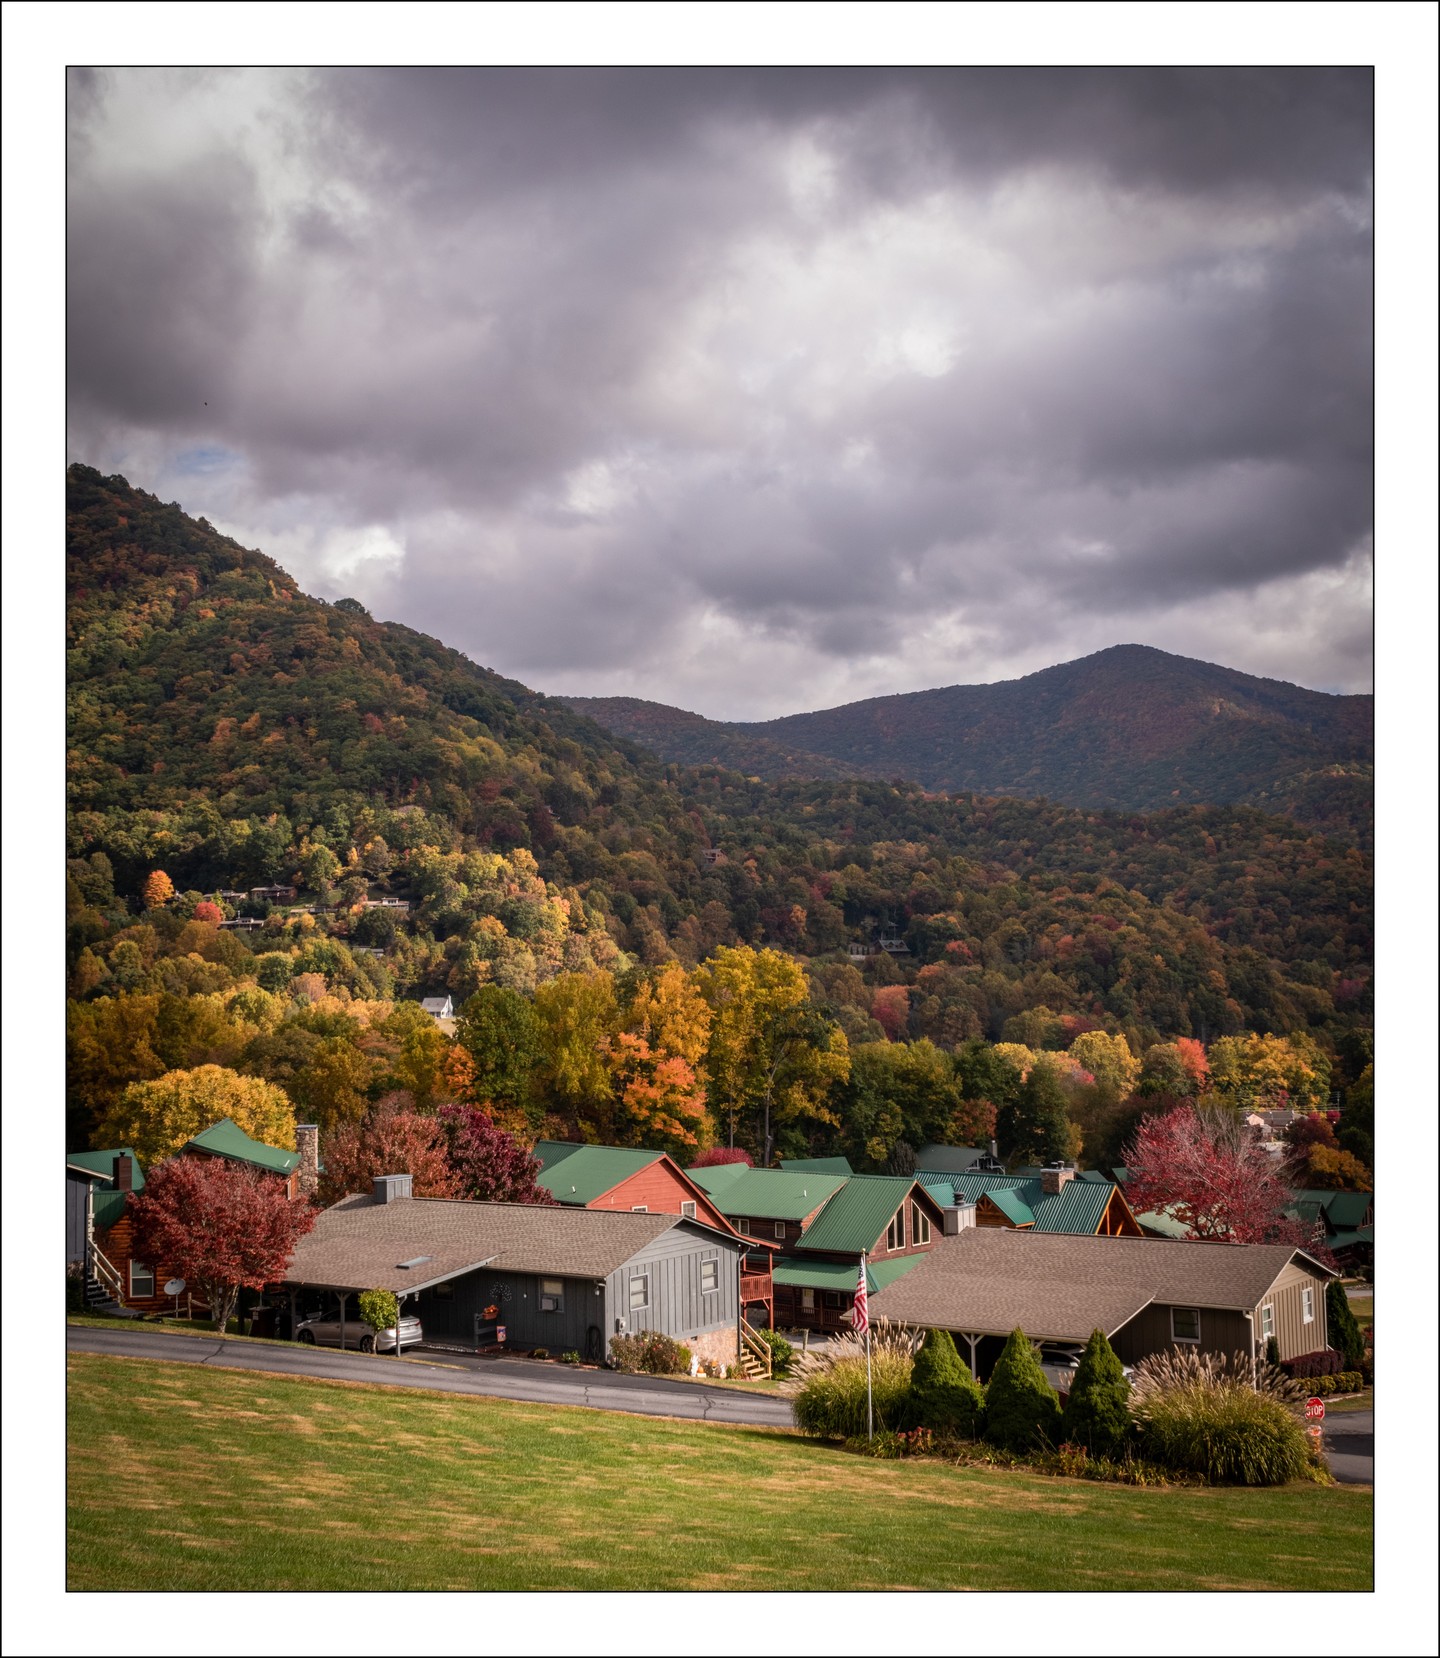 One more for #MaggieValley #NorthCarolina from October

#nikon
#d5600
#nikond5600
#photography
#landscape 
#digital 
#NC